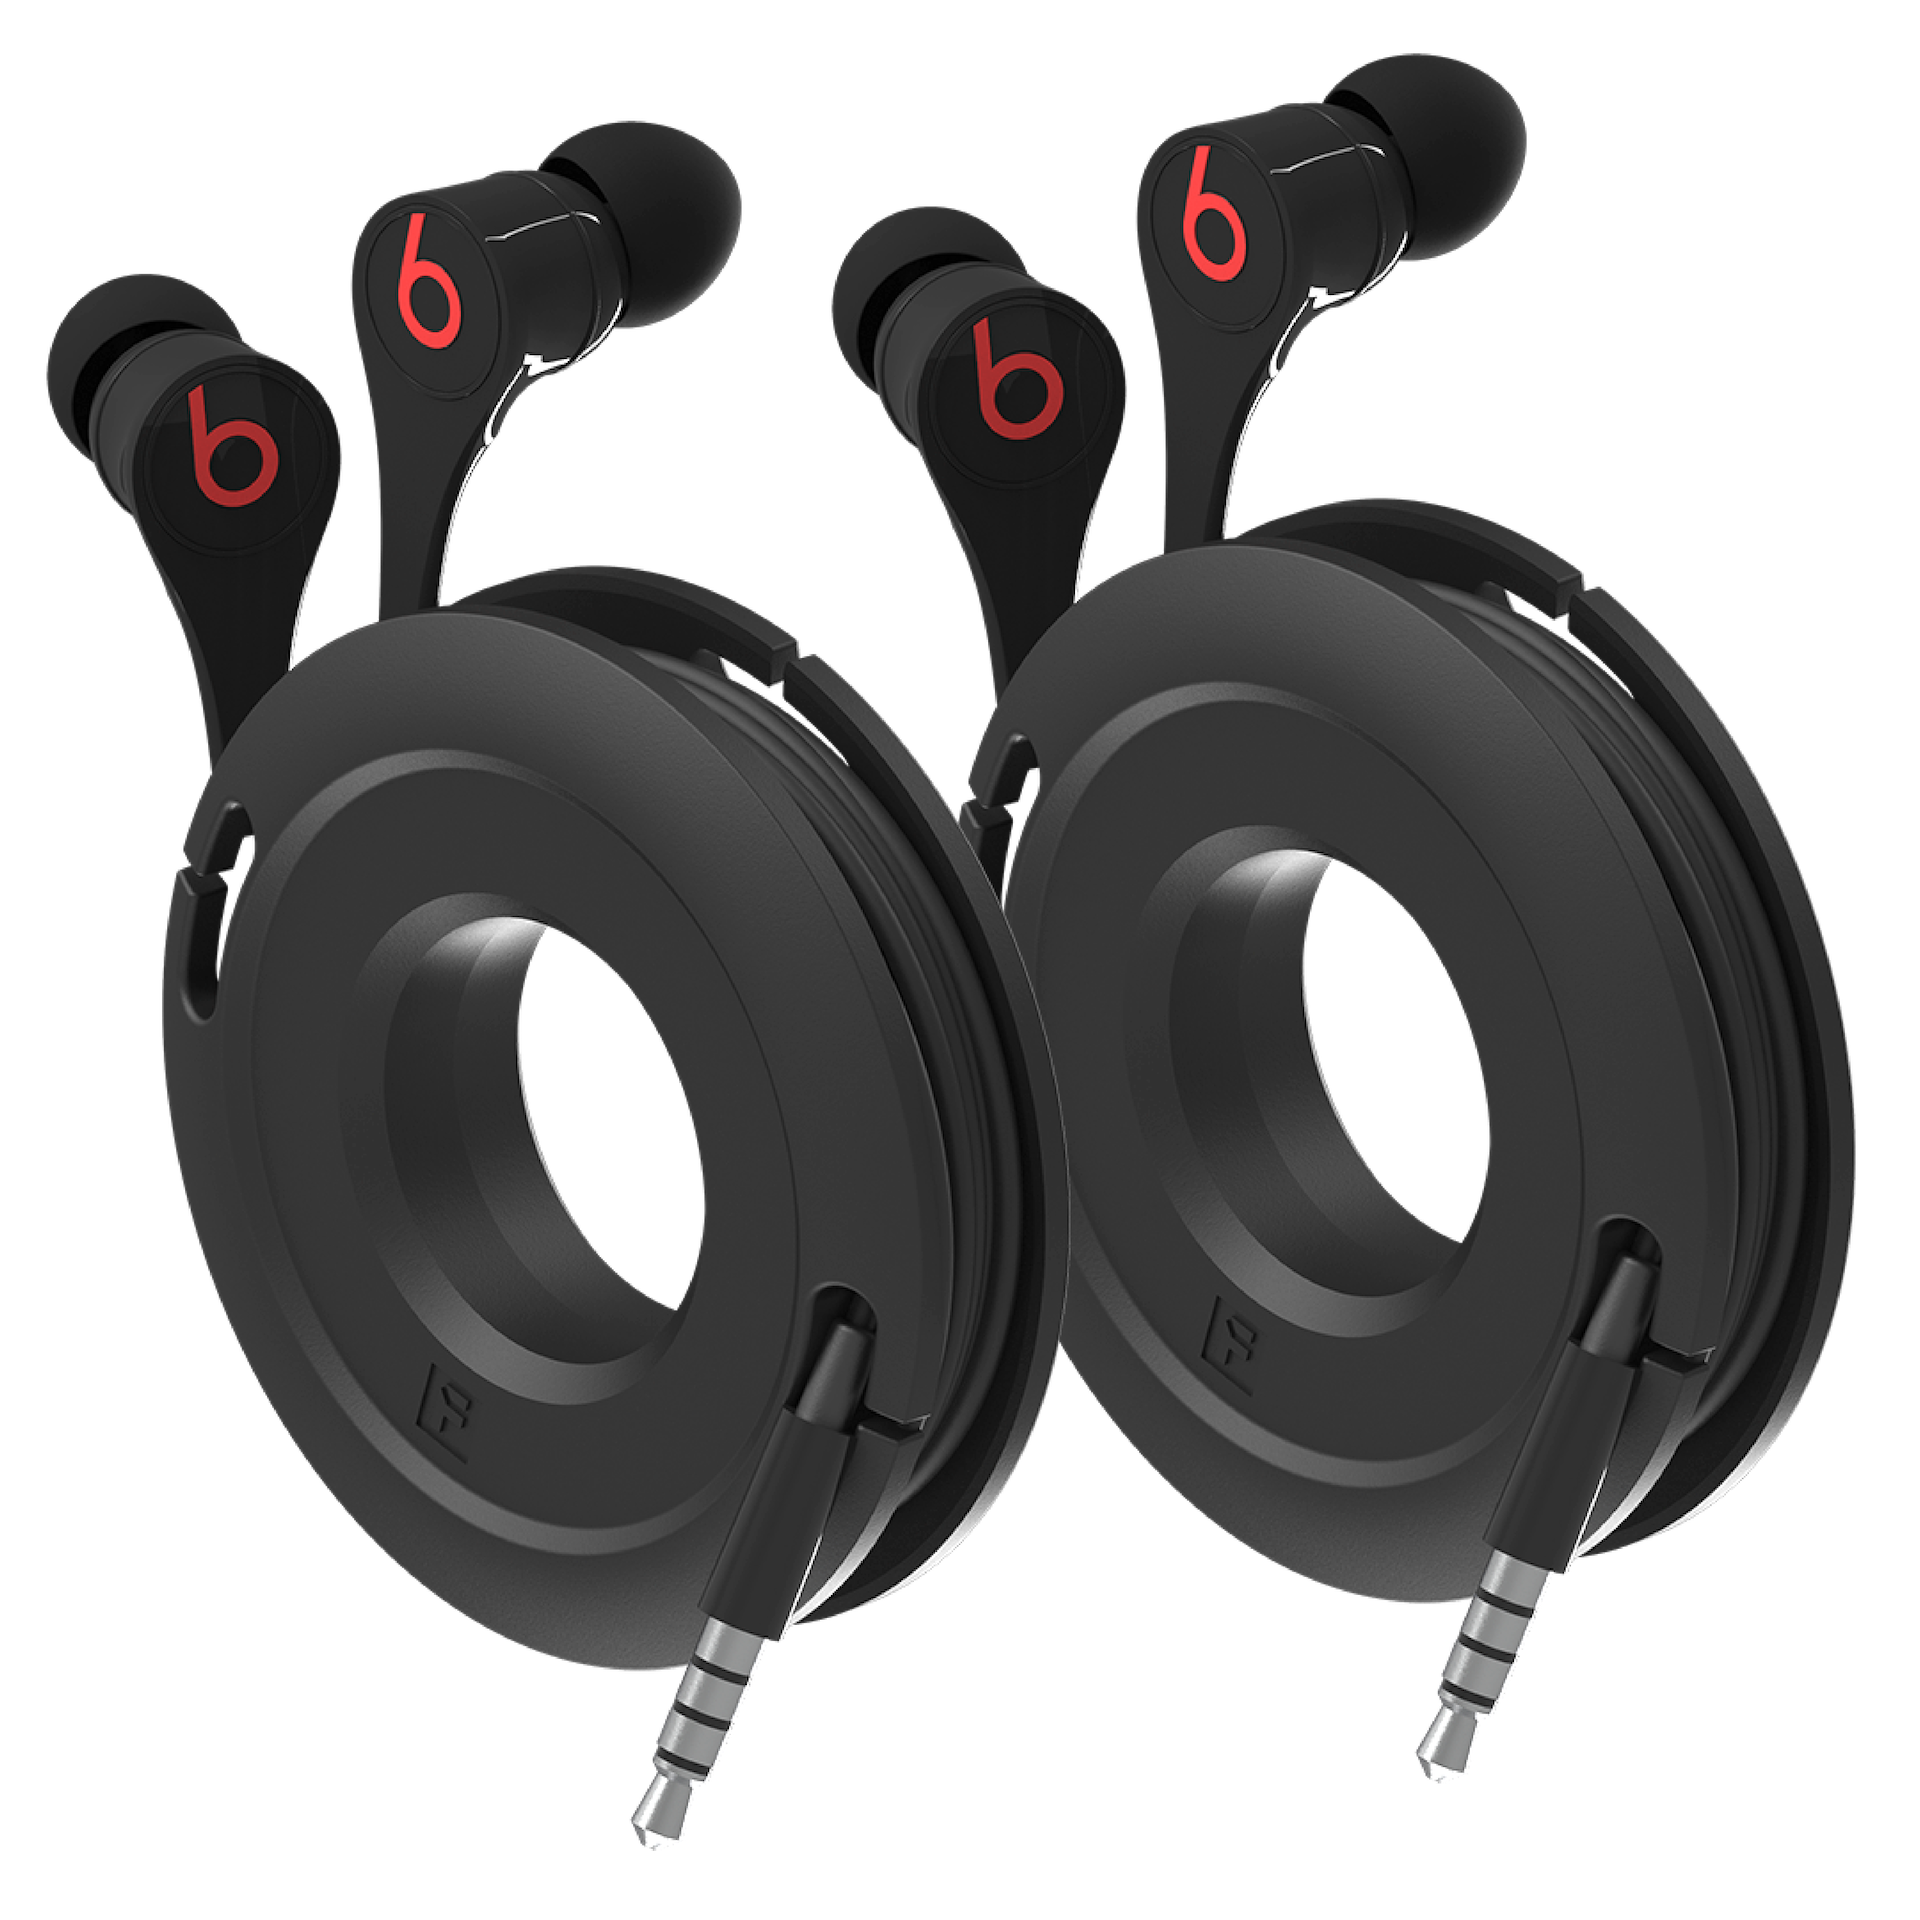 Two Small Black Headphone winders for corded headphones and wires